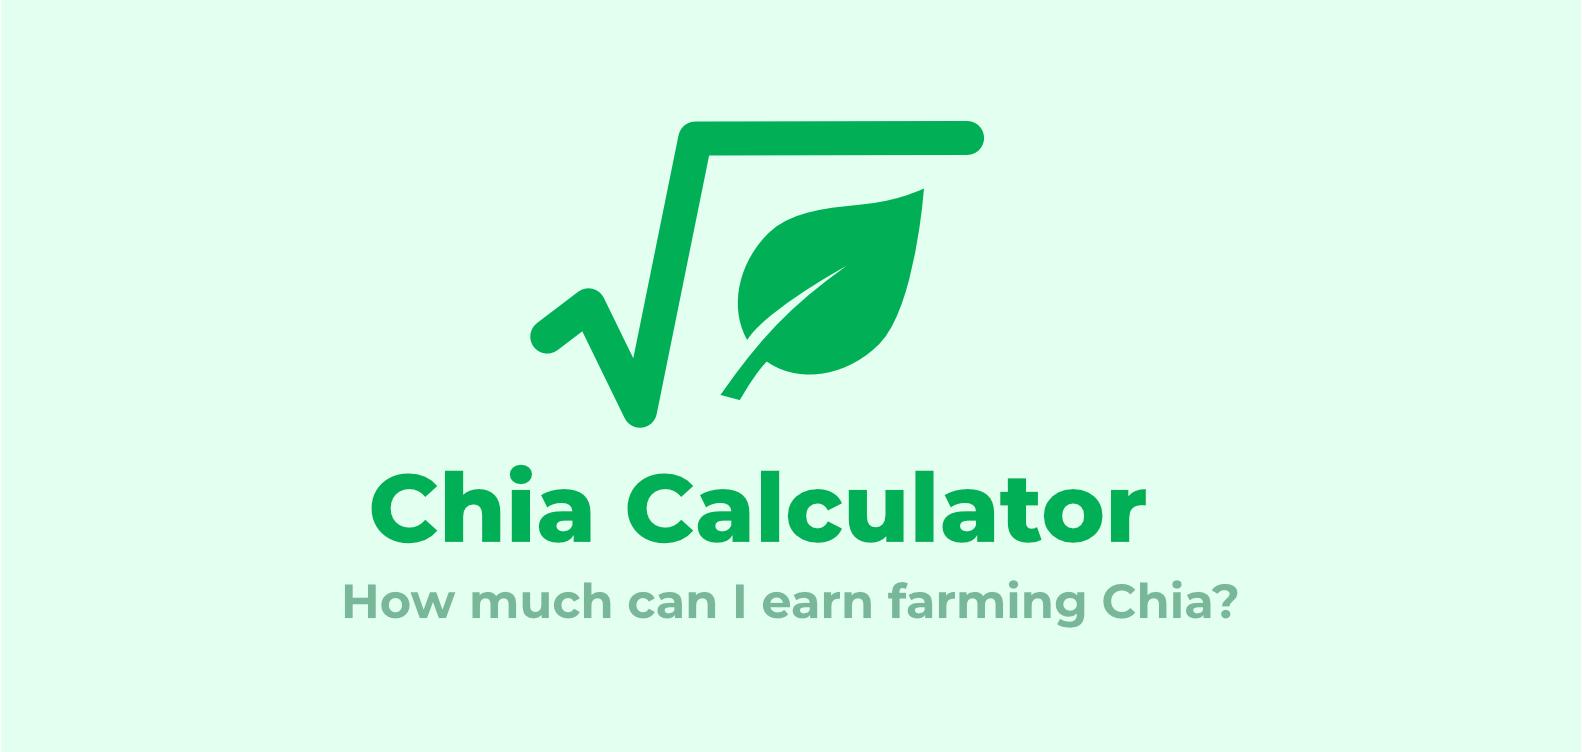 Chia Calculator - Advanced Cost and ROI Analysis